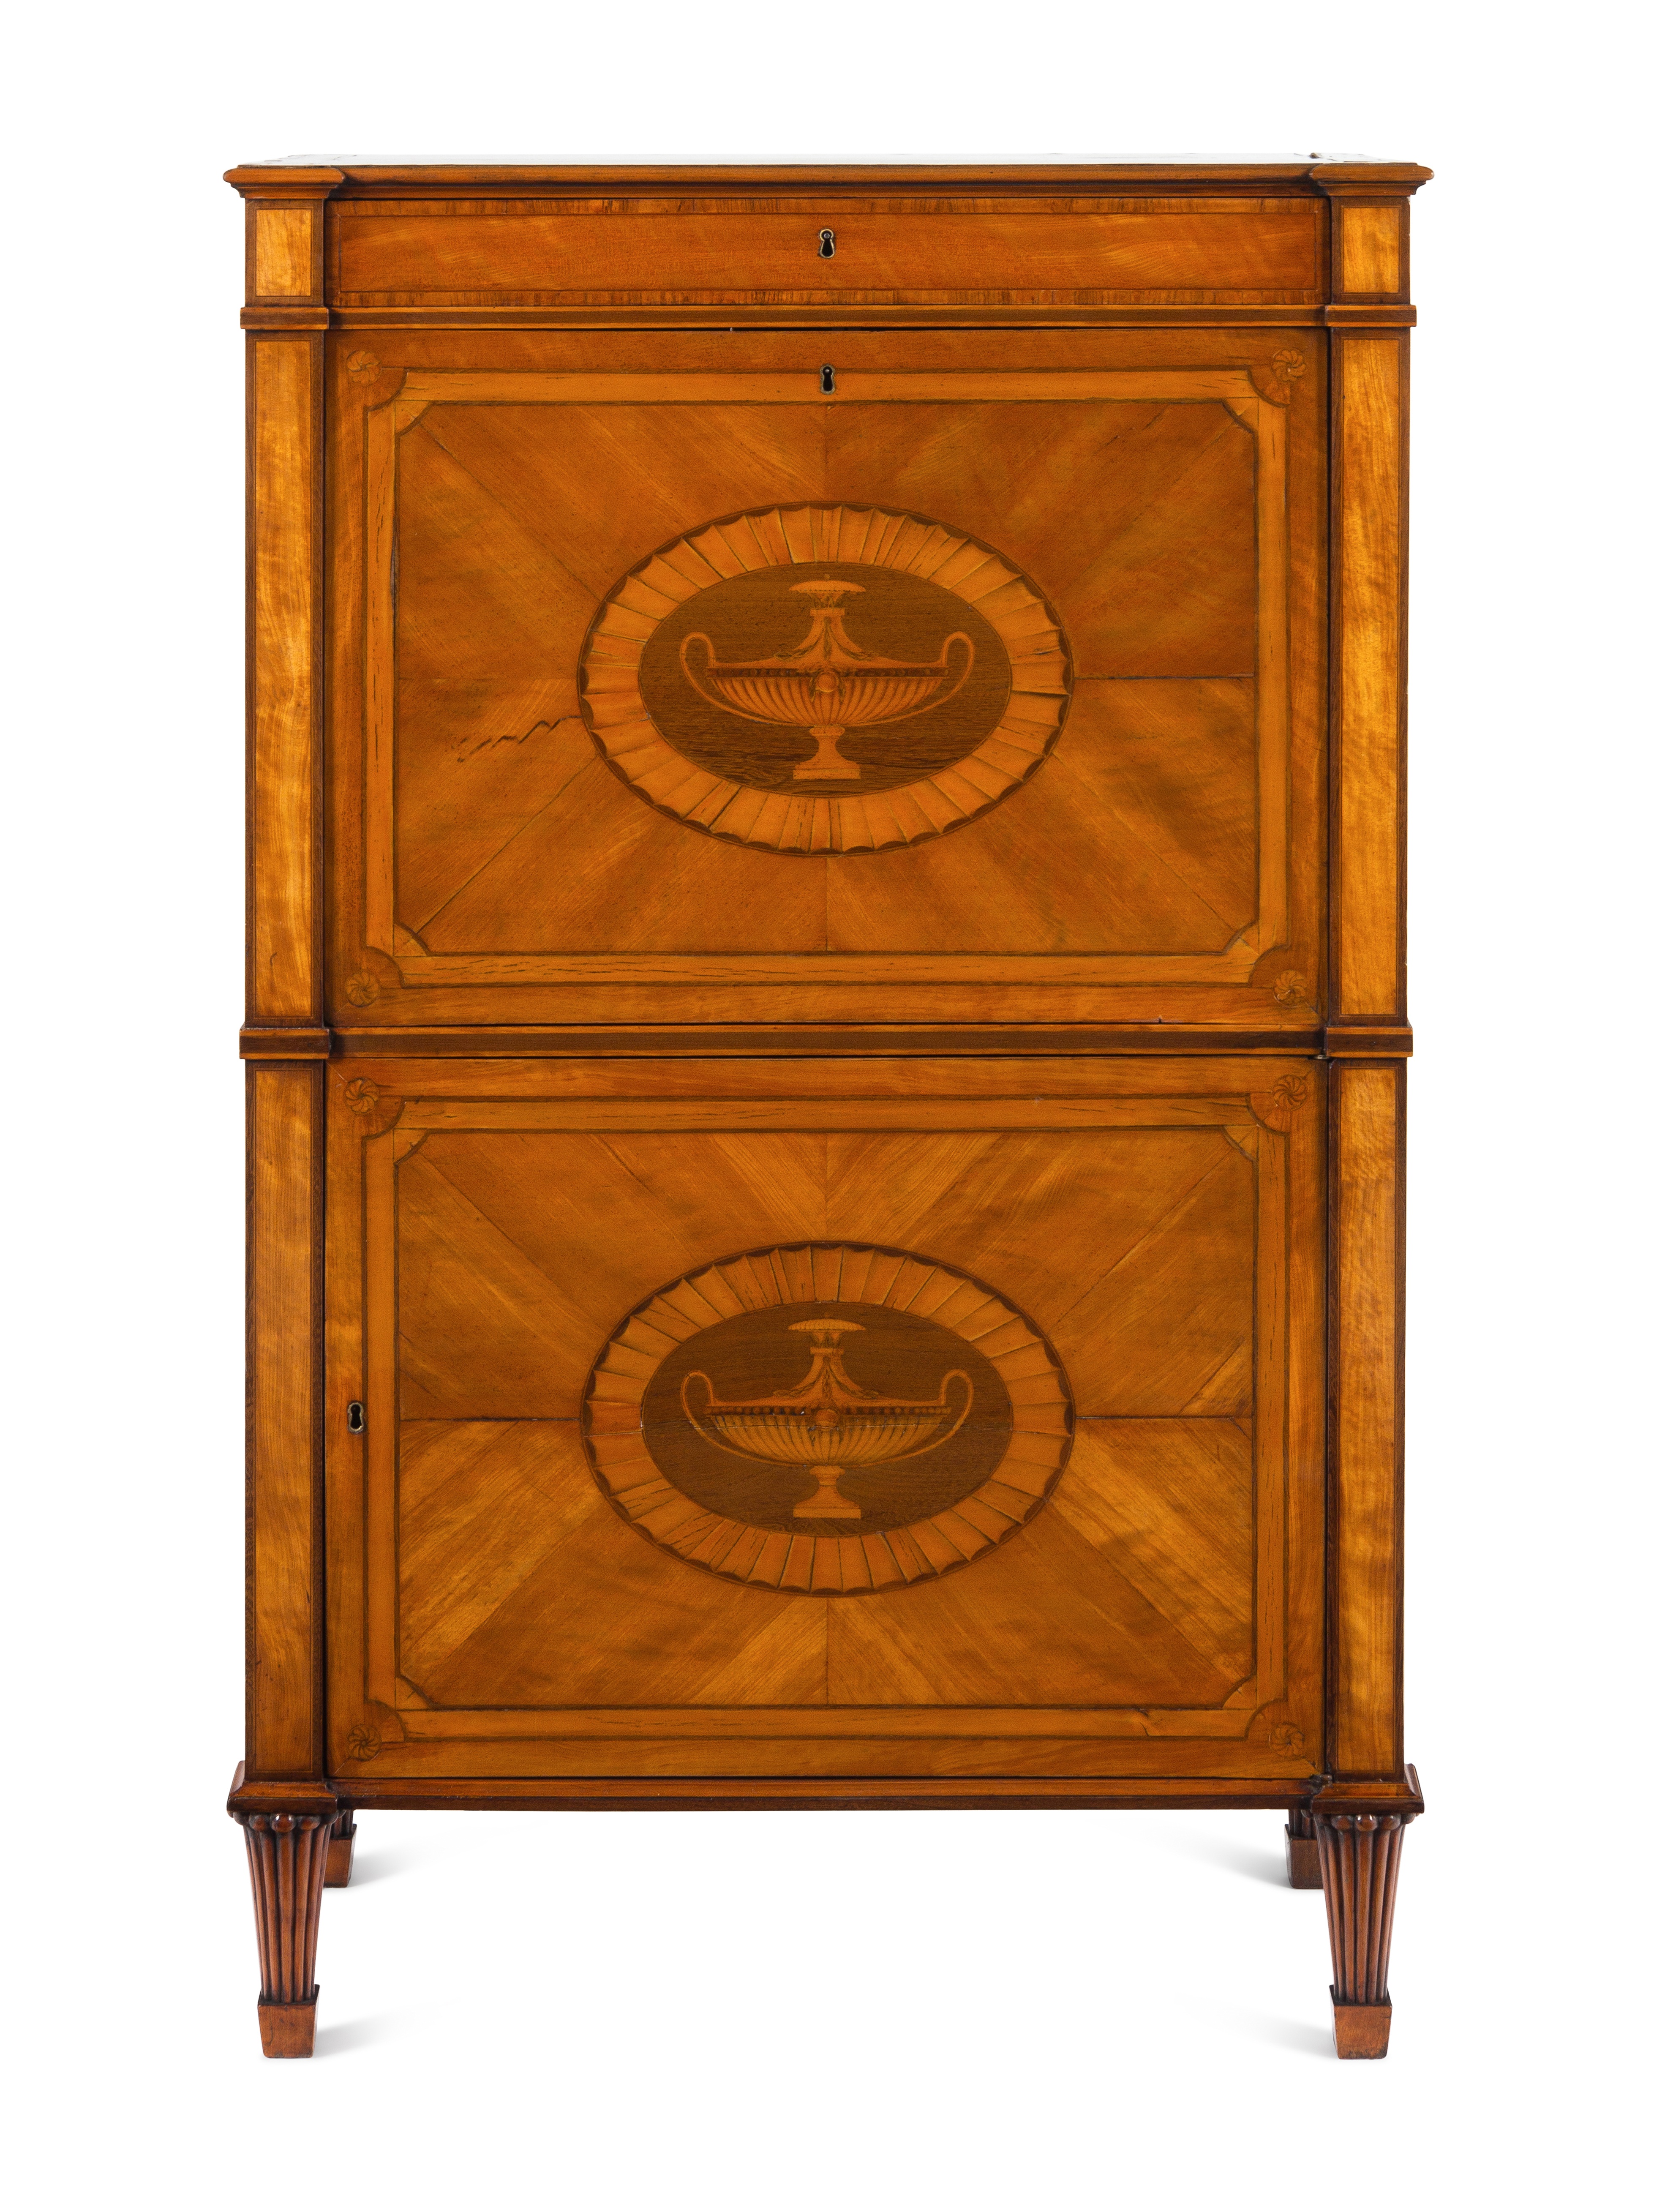 A George III Satinwood, Tulipwood and Amaranth Marquetry Fall-Front Secretaire